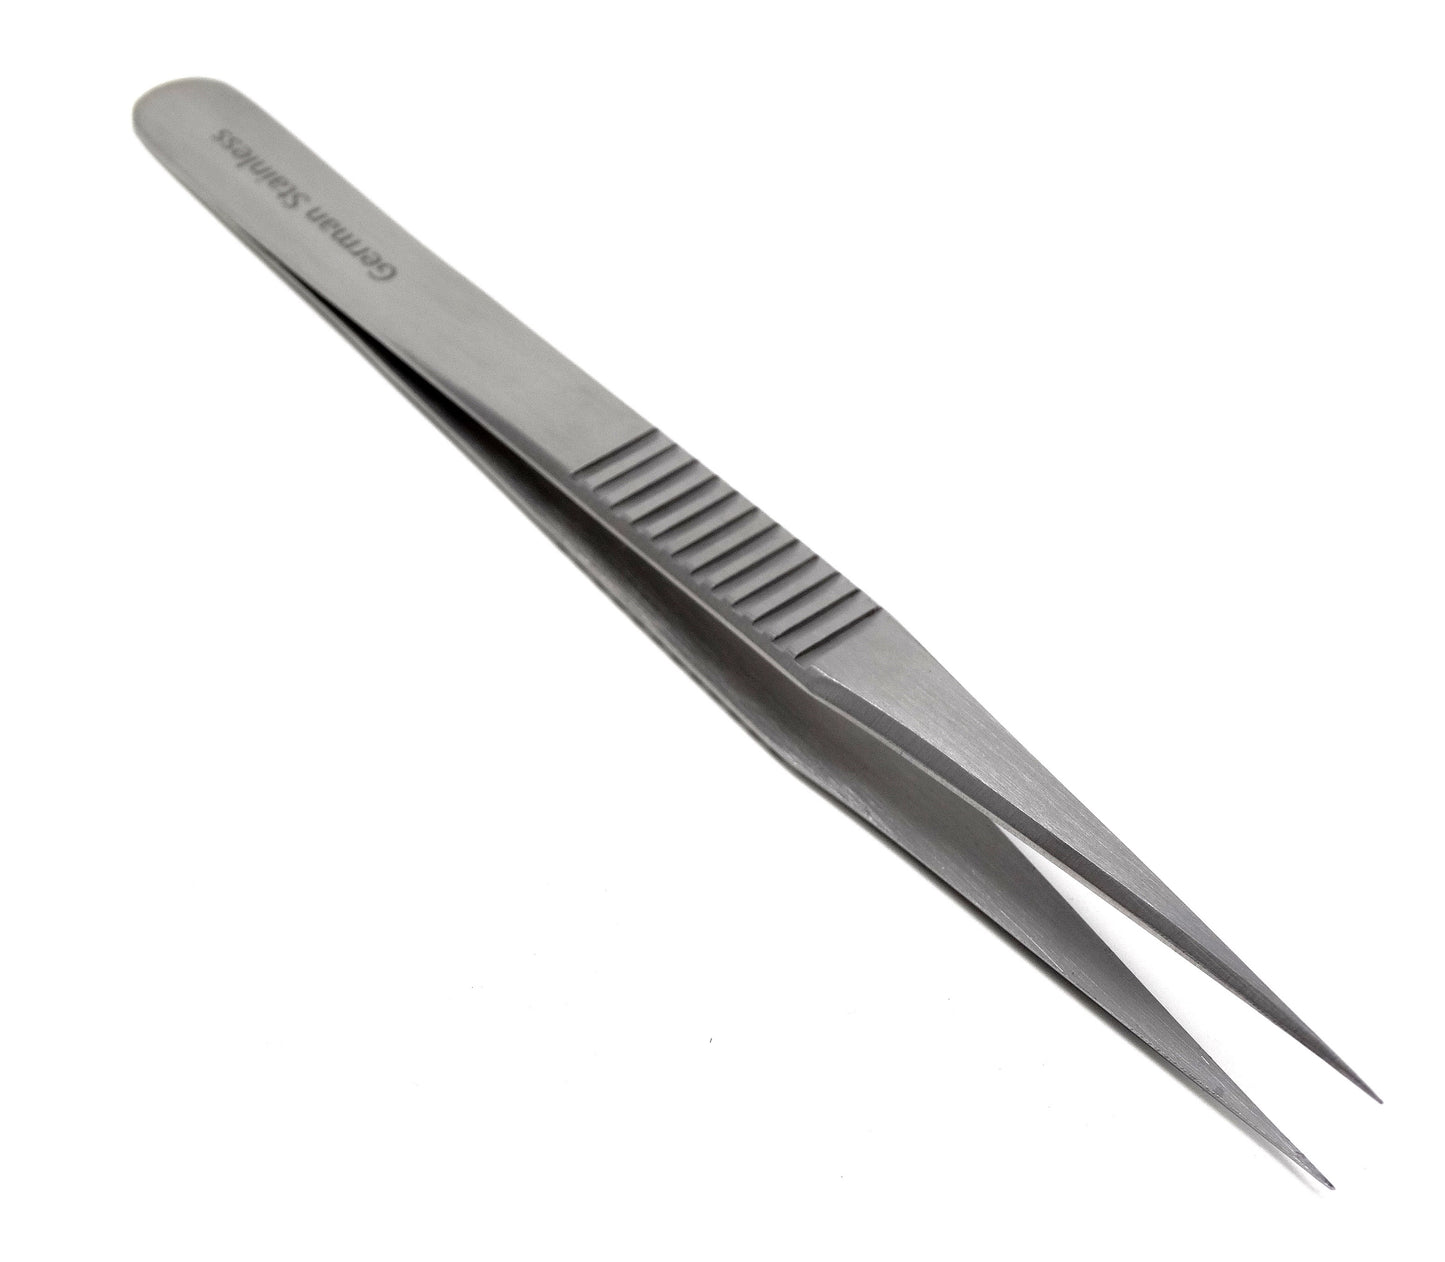 Stainless Steel Micro Surgical Forceps Tweezers Straight, Ridged Handle, Fine Point, Premium Quality